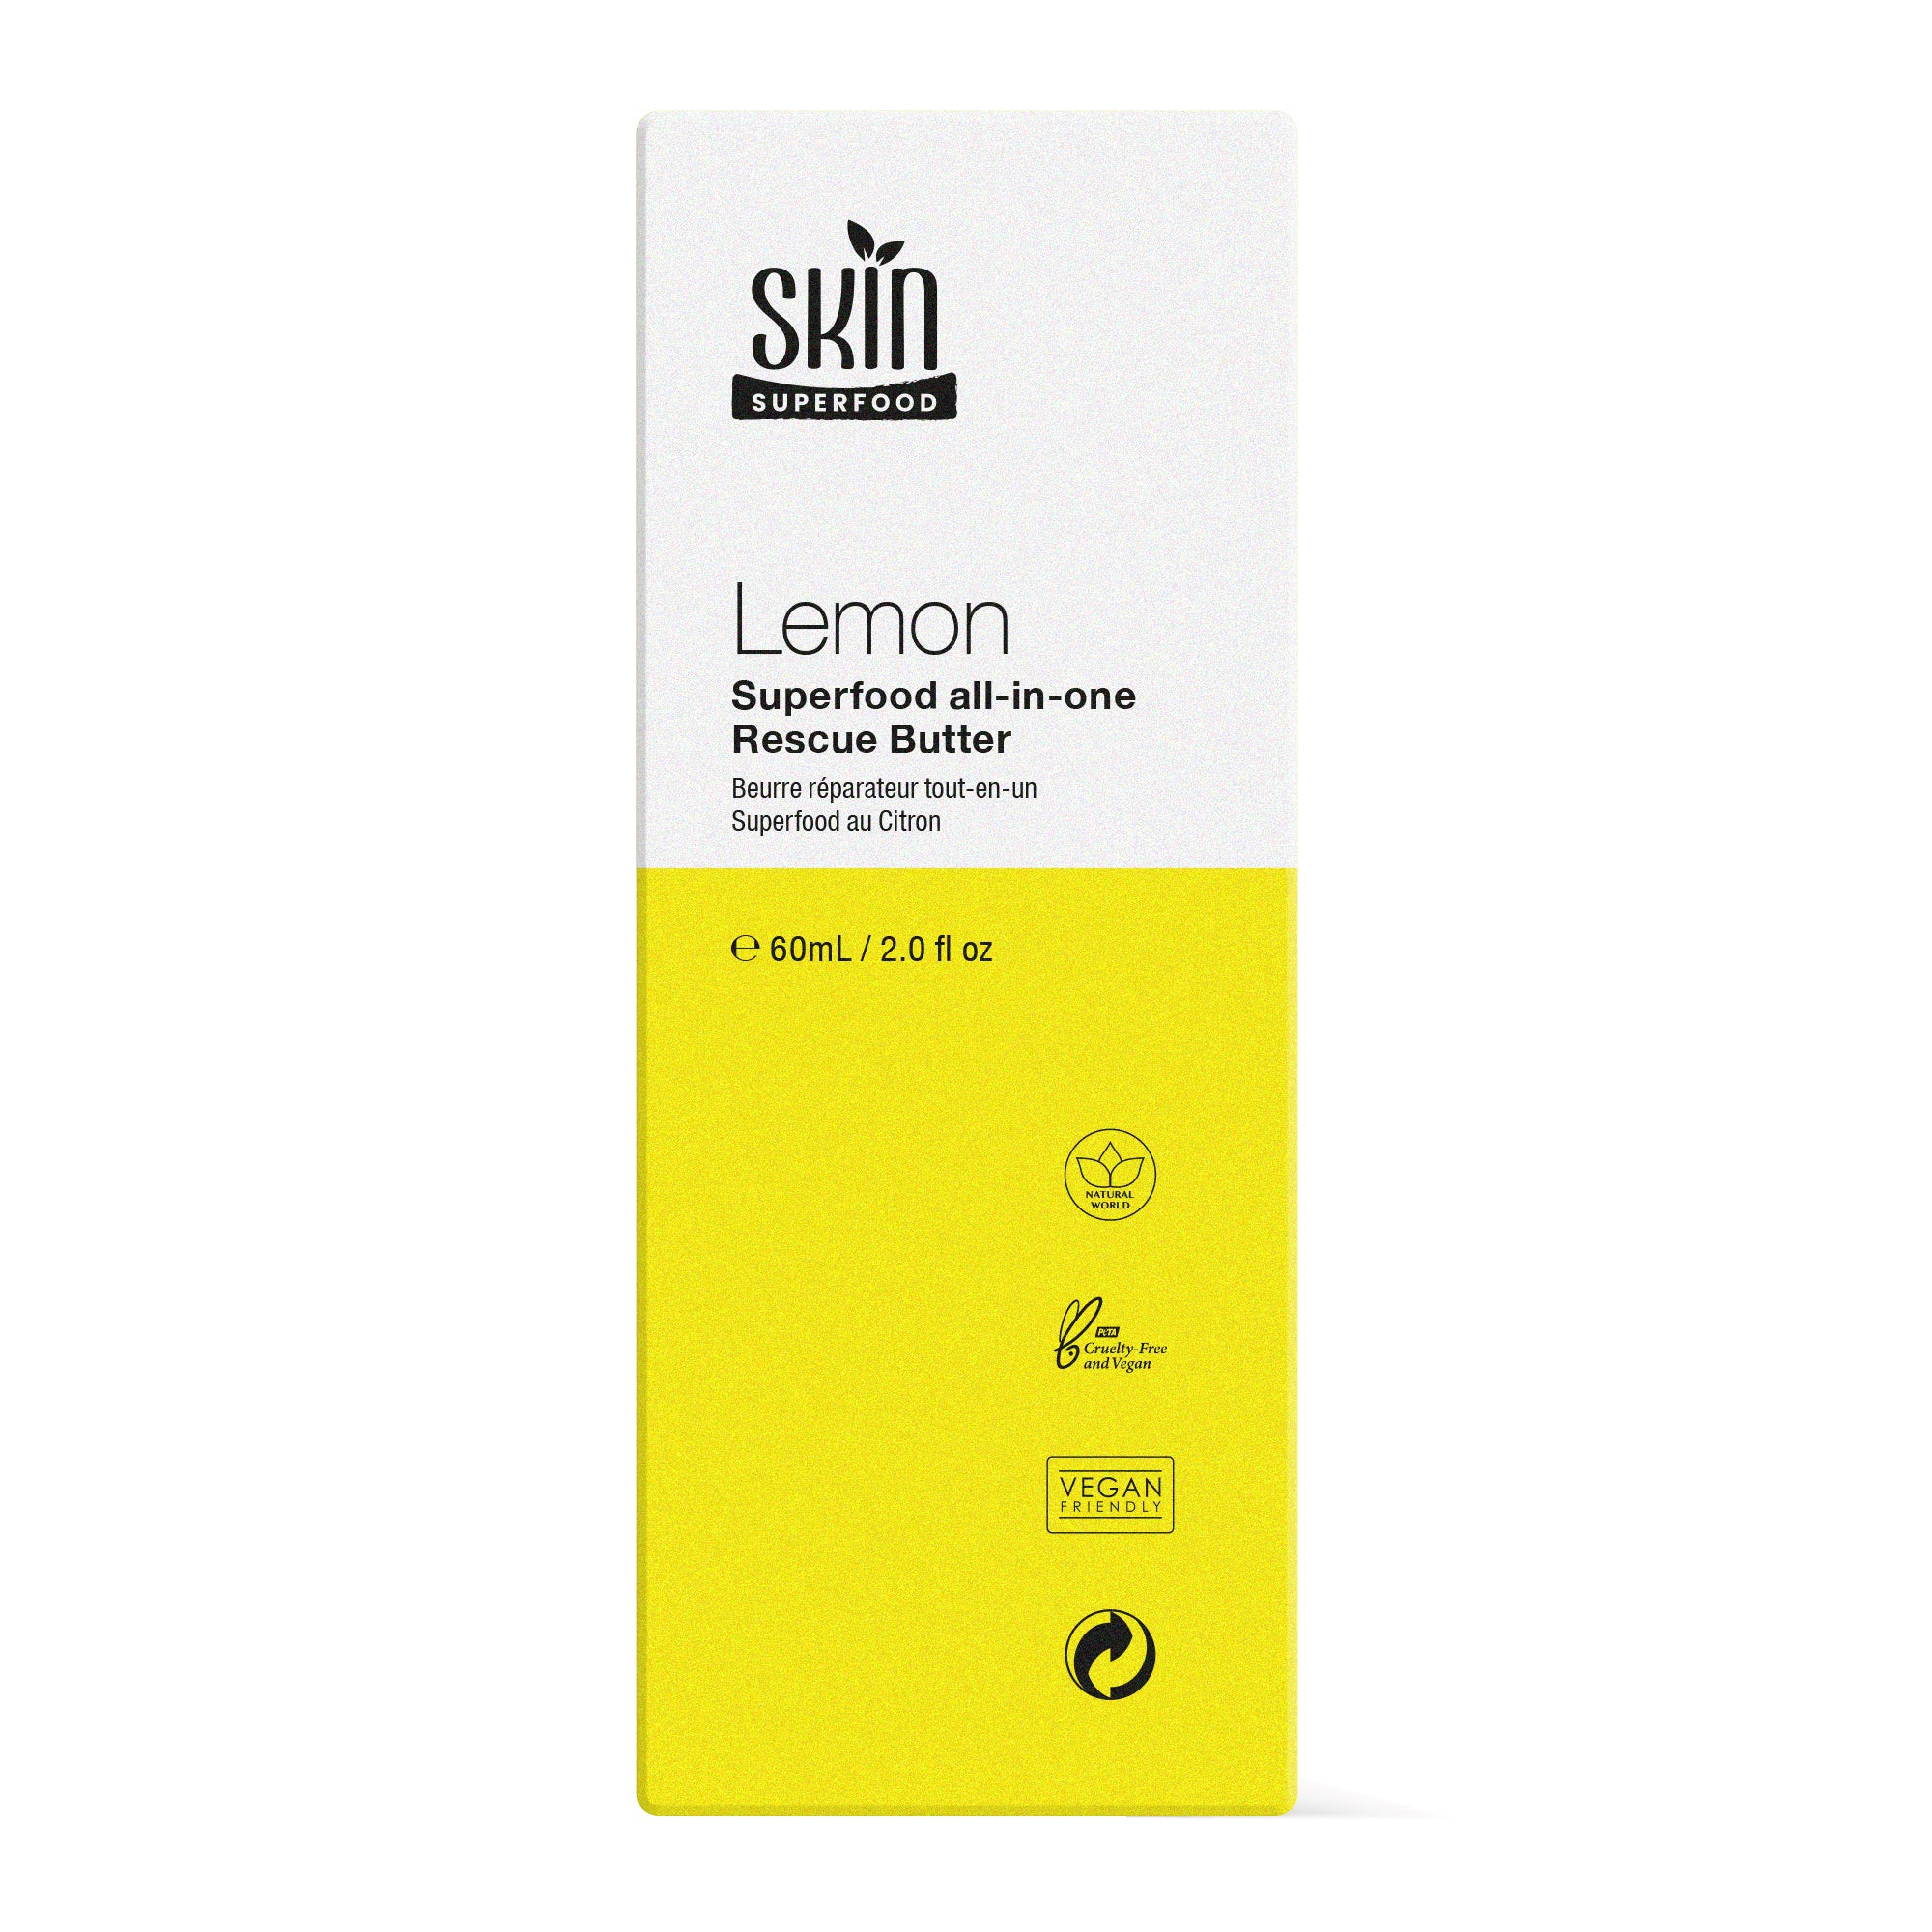 SF Lemon Superfood Rescue butter 60ml